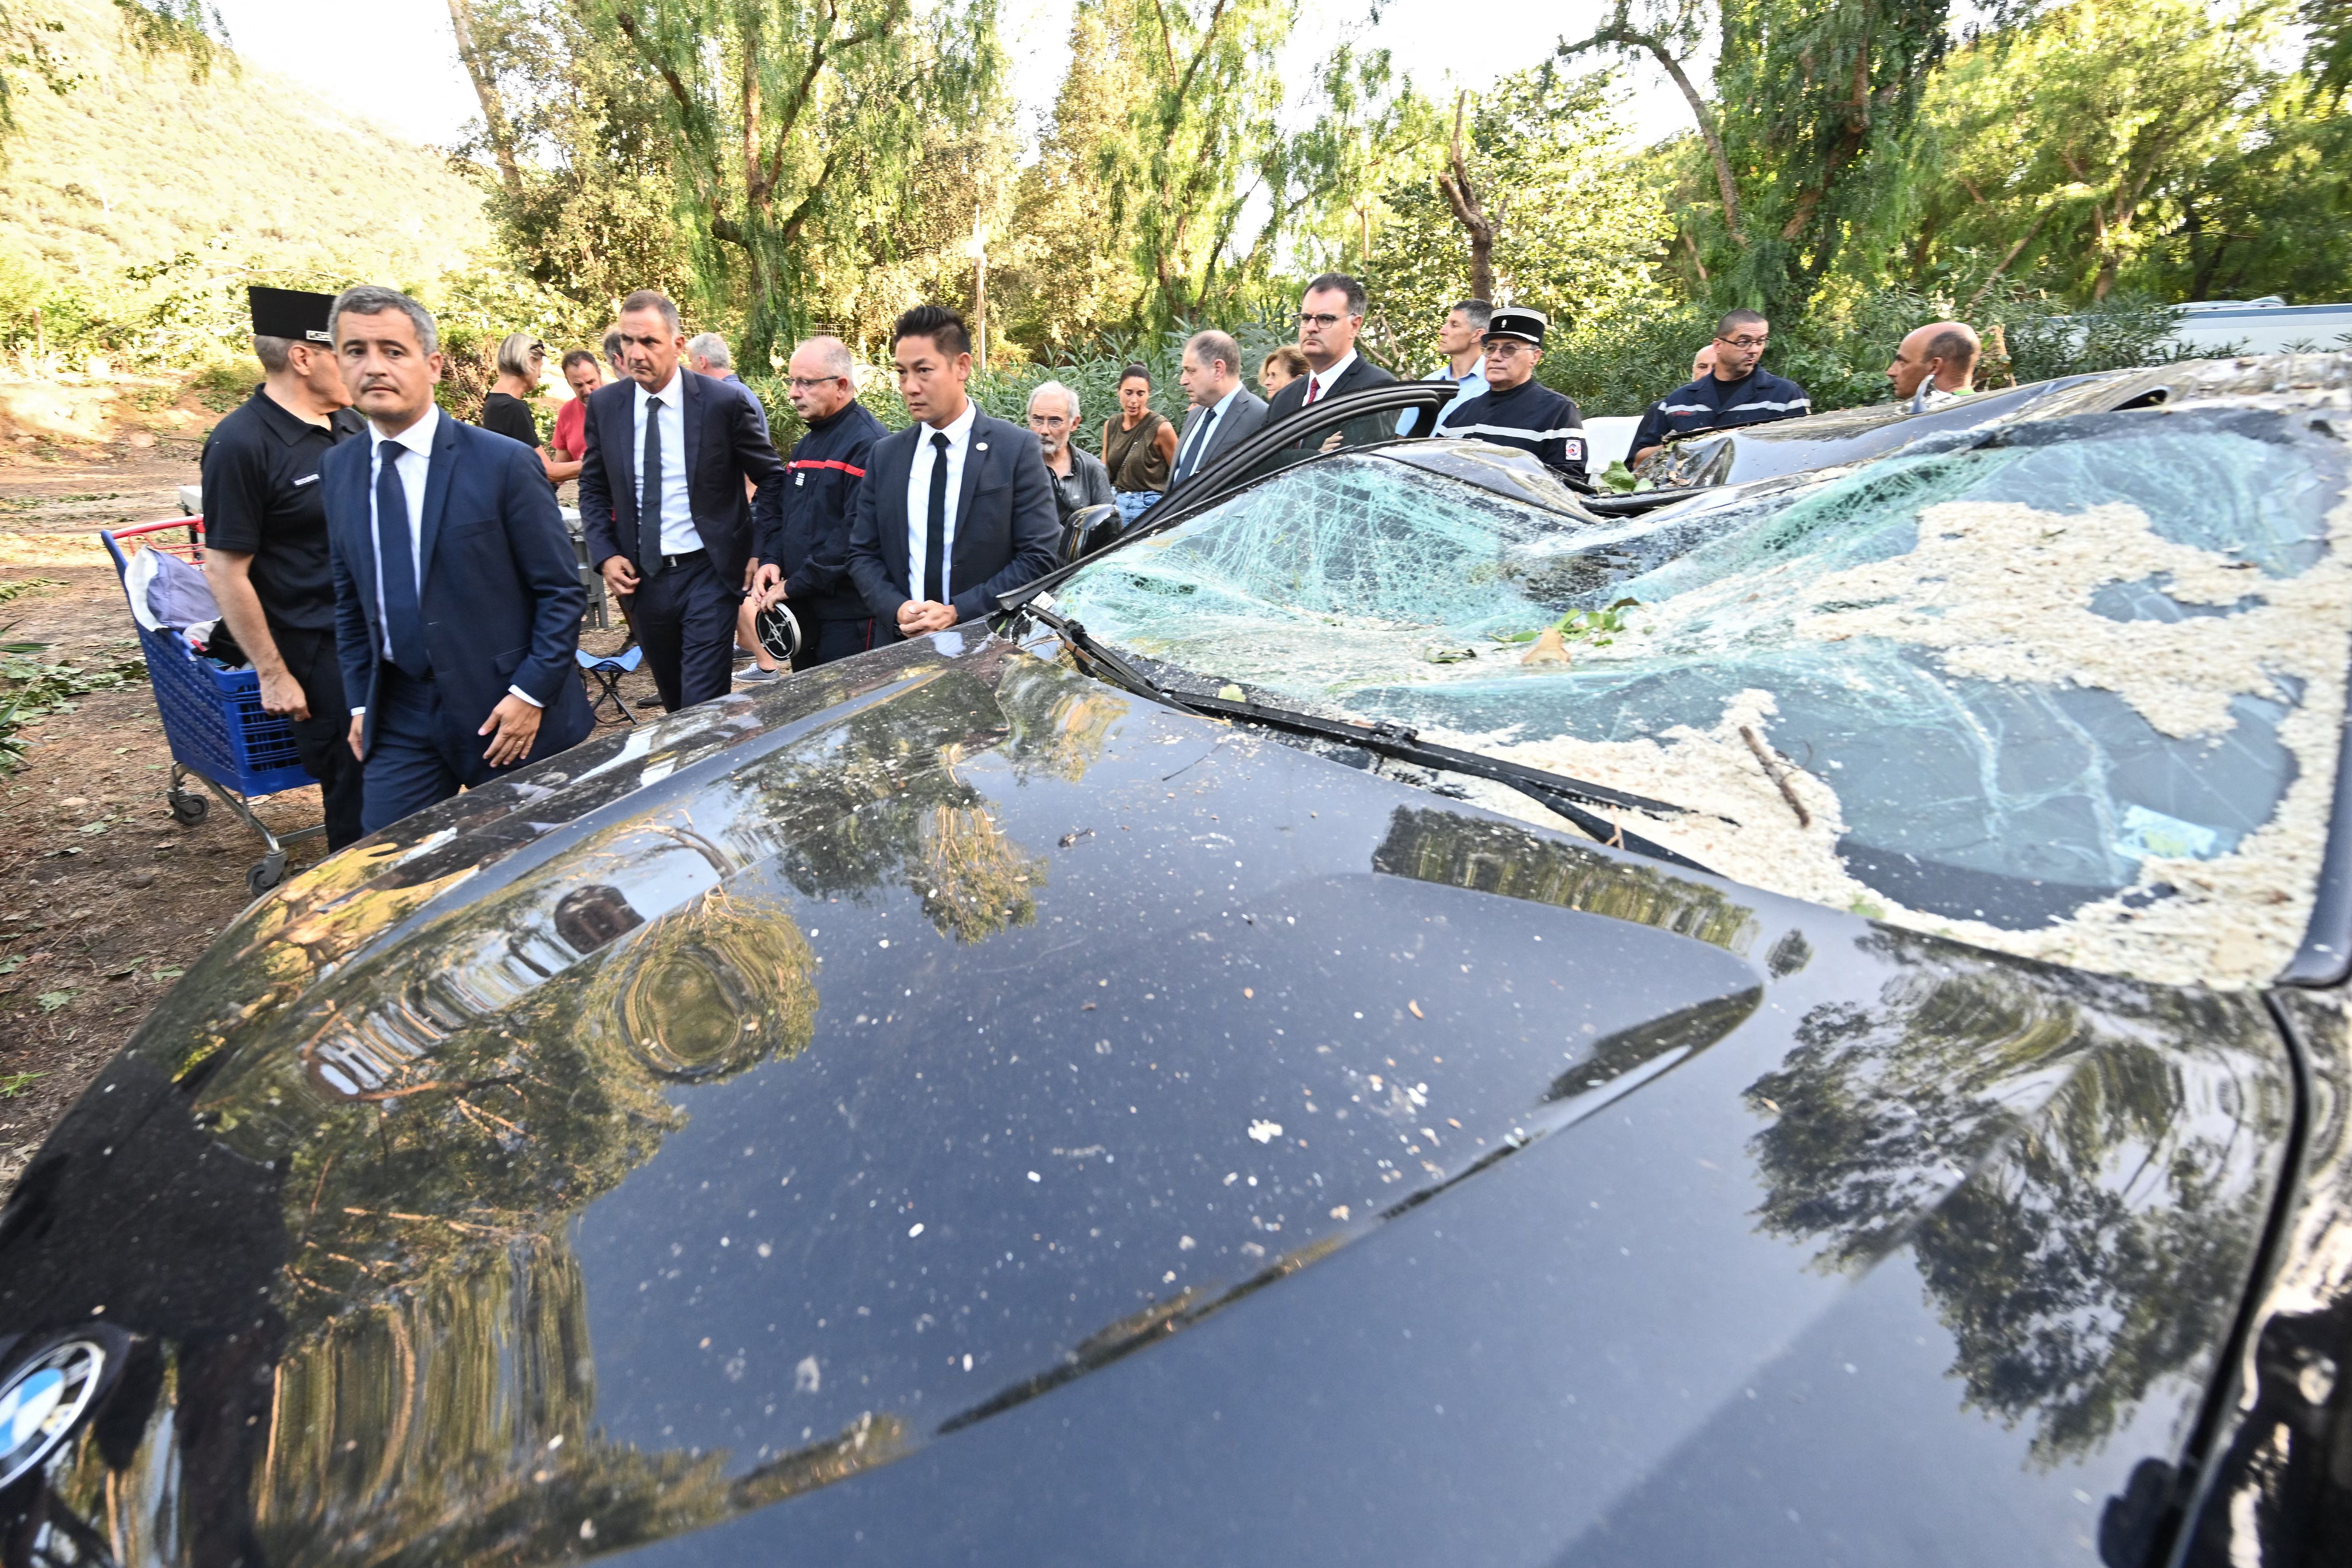 France's Interior Minister Gerald Darmanin (L) walks by a damaged car as he visits the Sagone camping site on the French island of Corsica on Aug. 18.